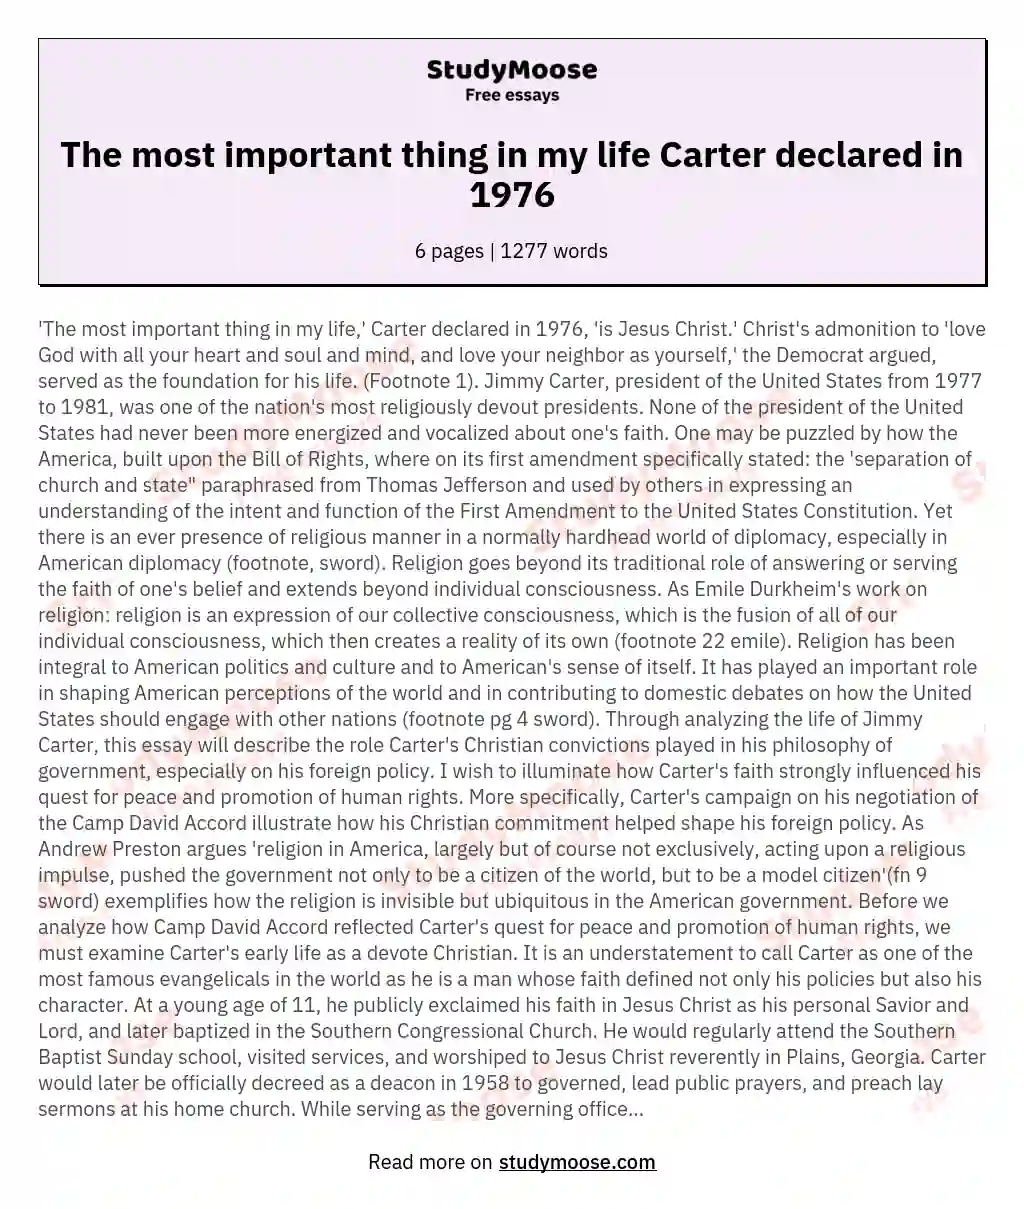 The most important thing in my life Carter declared in 1976 essay